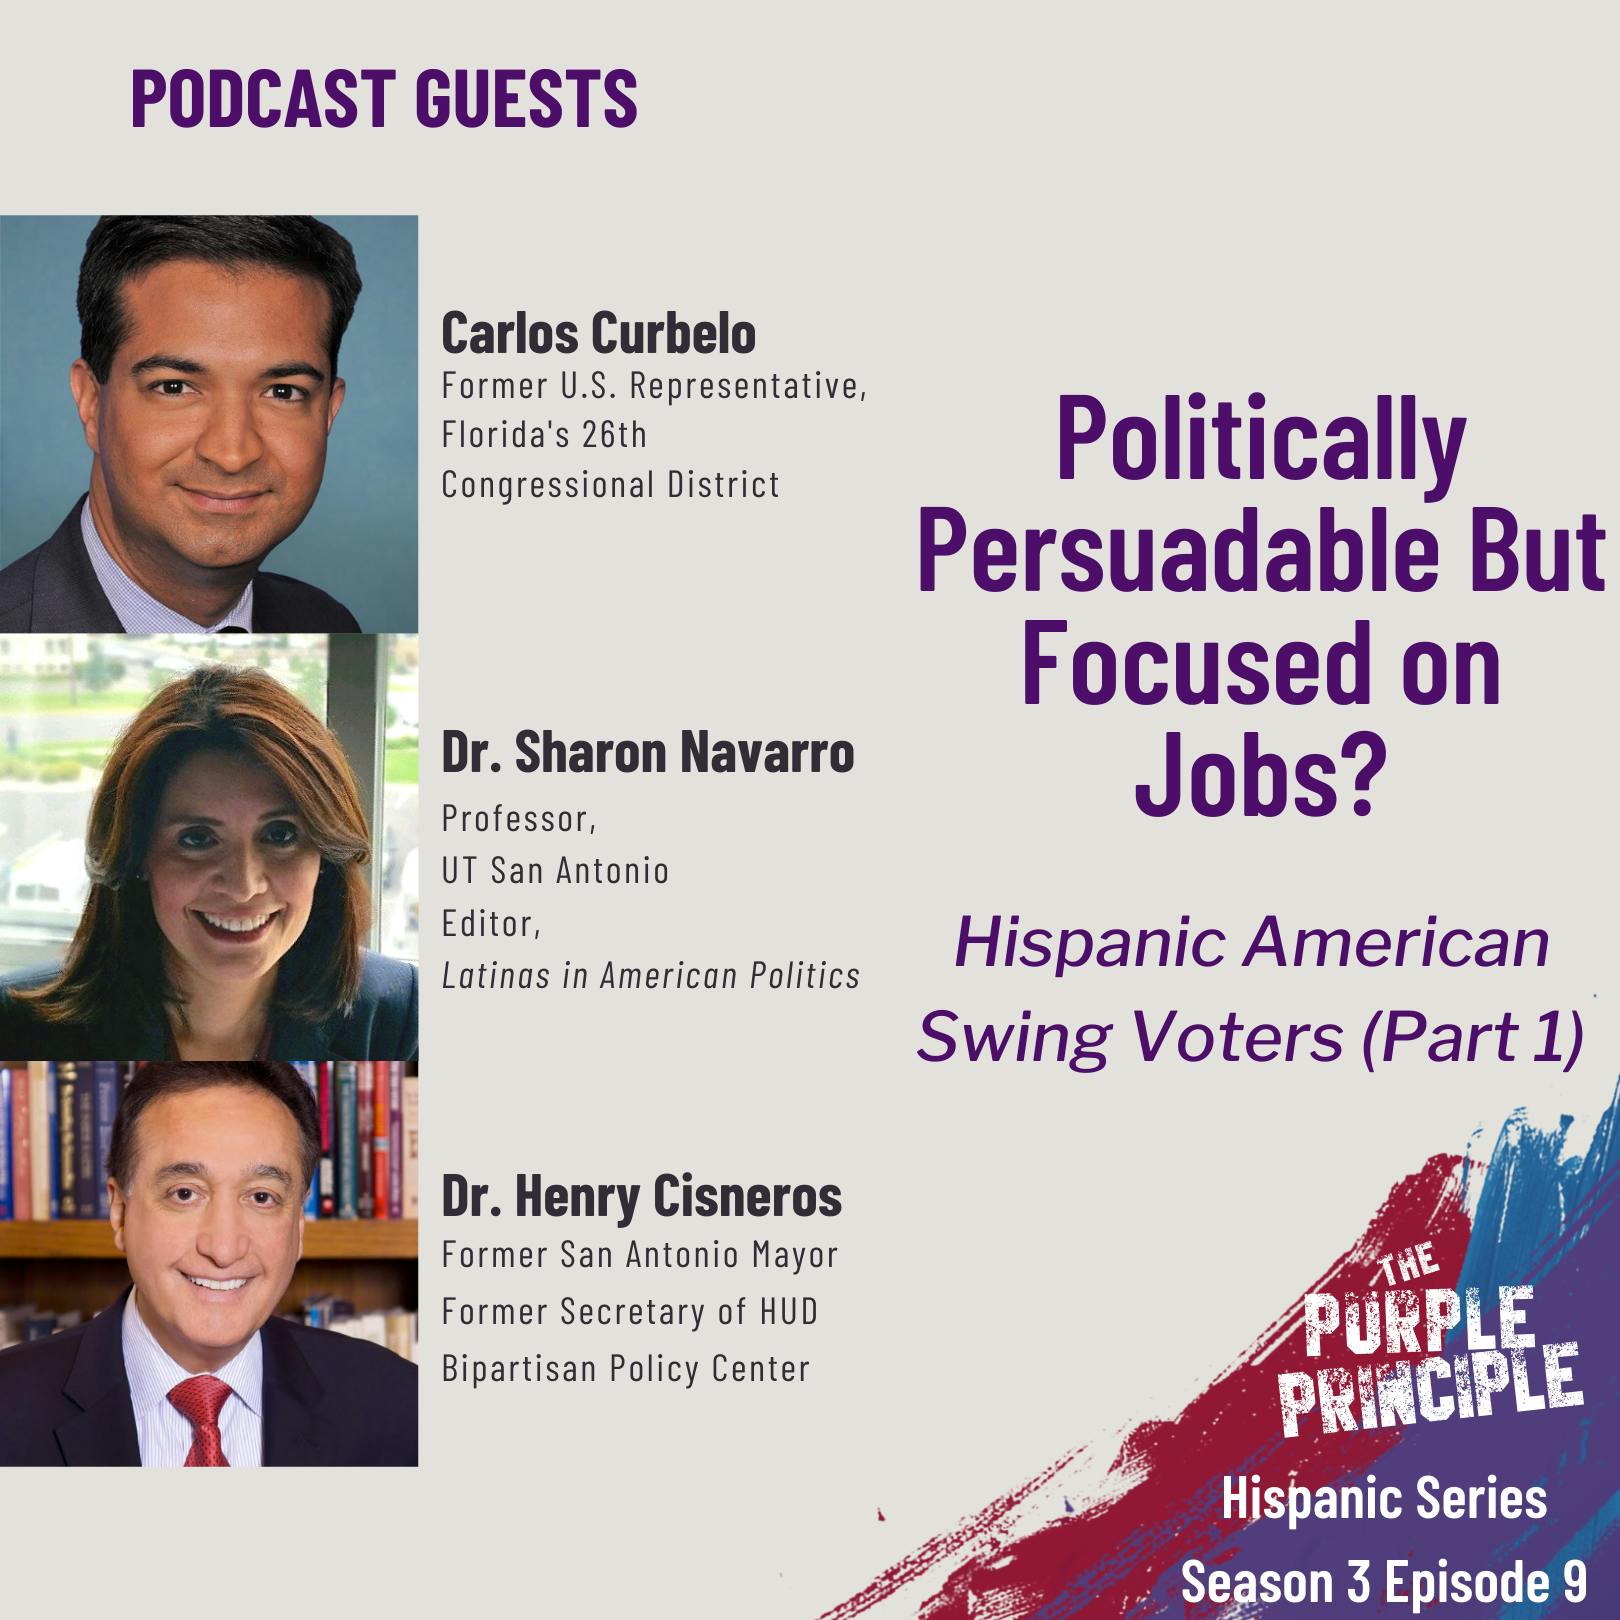 Repodcast: Politically Persuadable But Focused on Jobs? Hispanic American Swing Voters (Part 1)